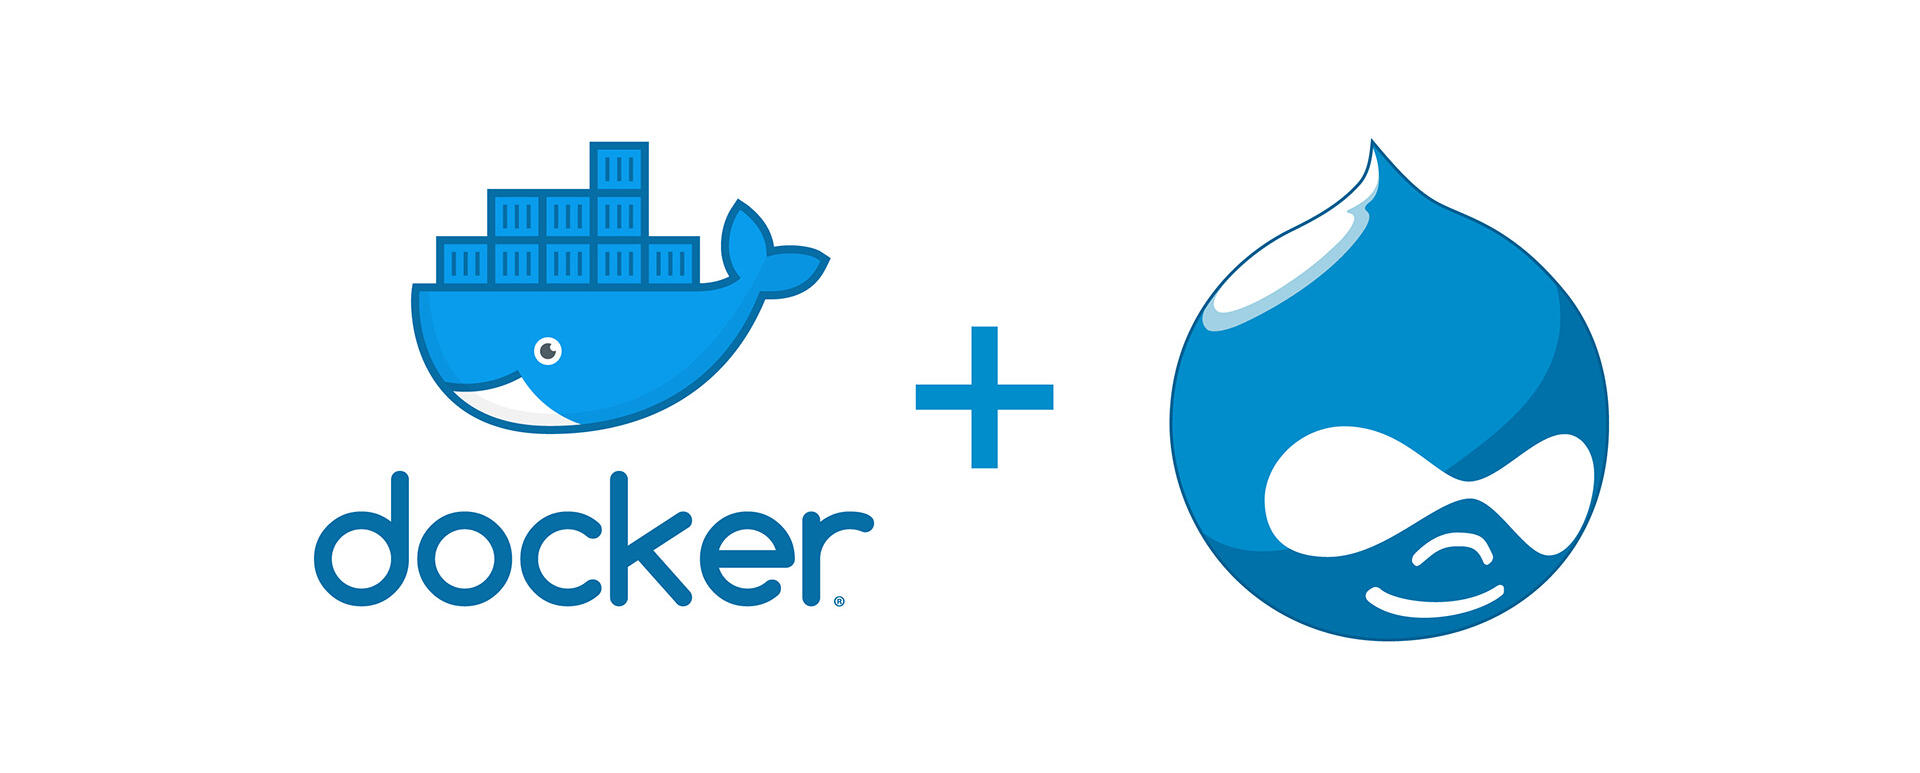 Docker logo (blue whale with containers on it's back). Typical container print was replaced with Drupal 8 logos.